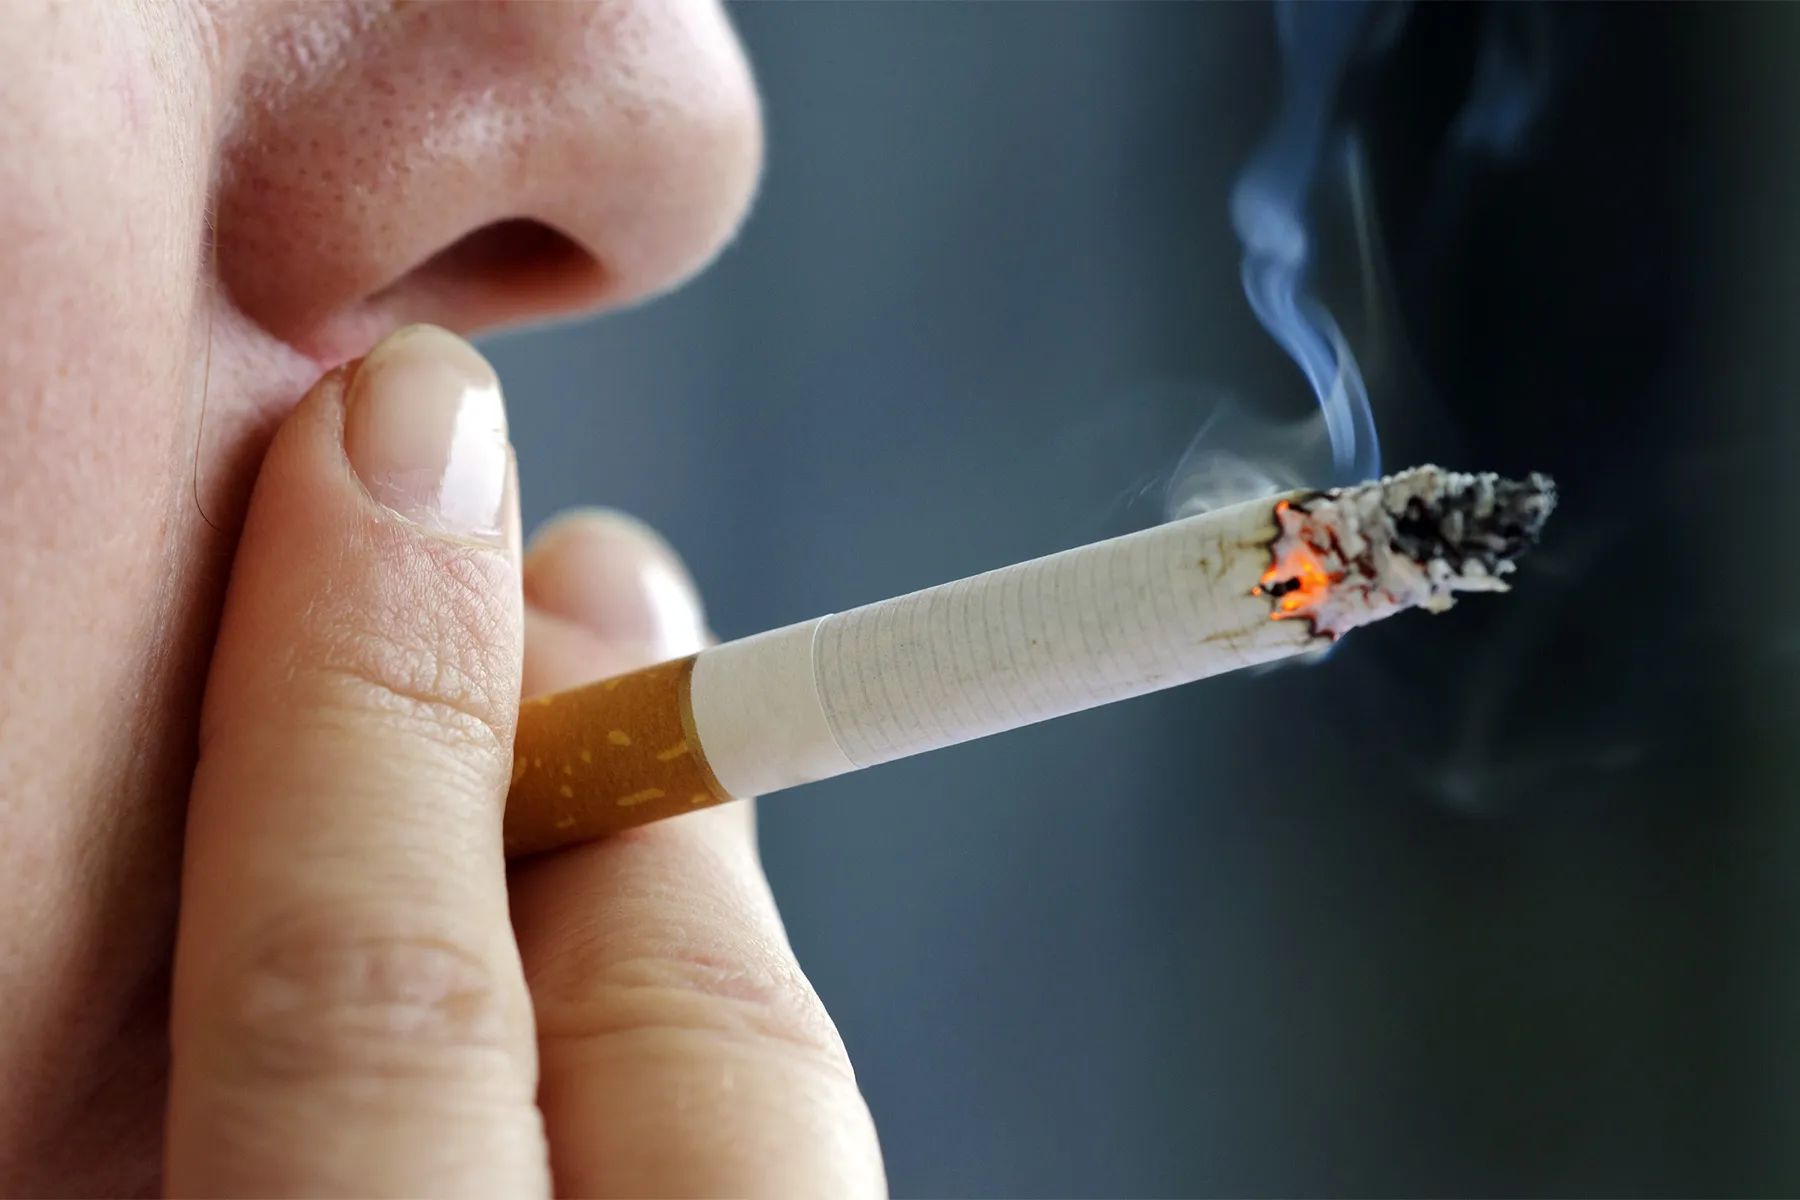 Low-Nicotine Cigarettes Won’t Leave Smokers Agitated, Study Finds